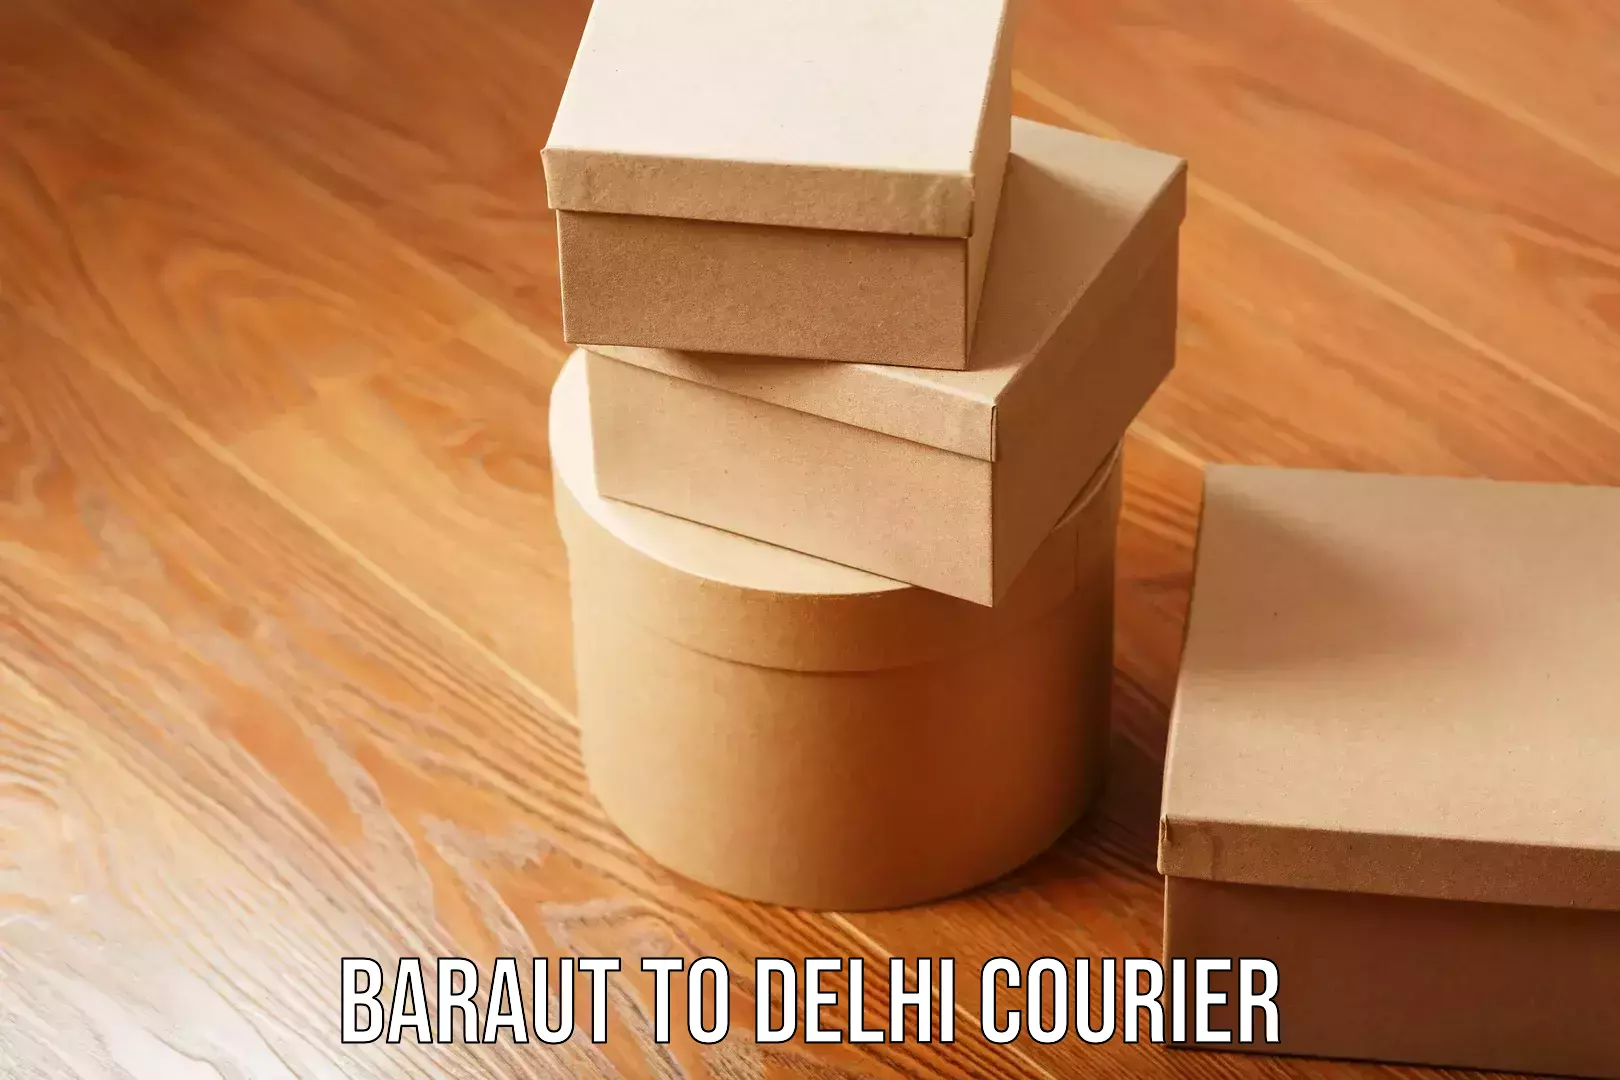 Courier service booking Baraut to Delhi